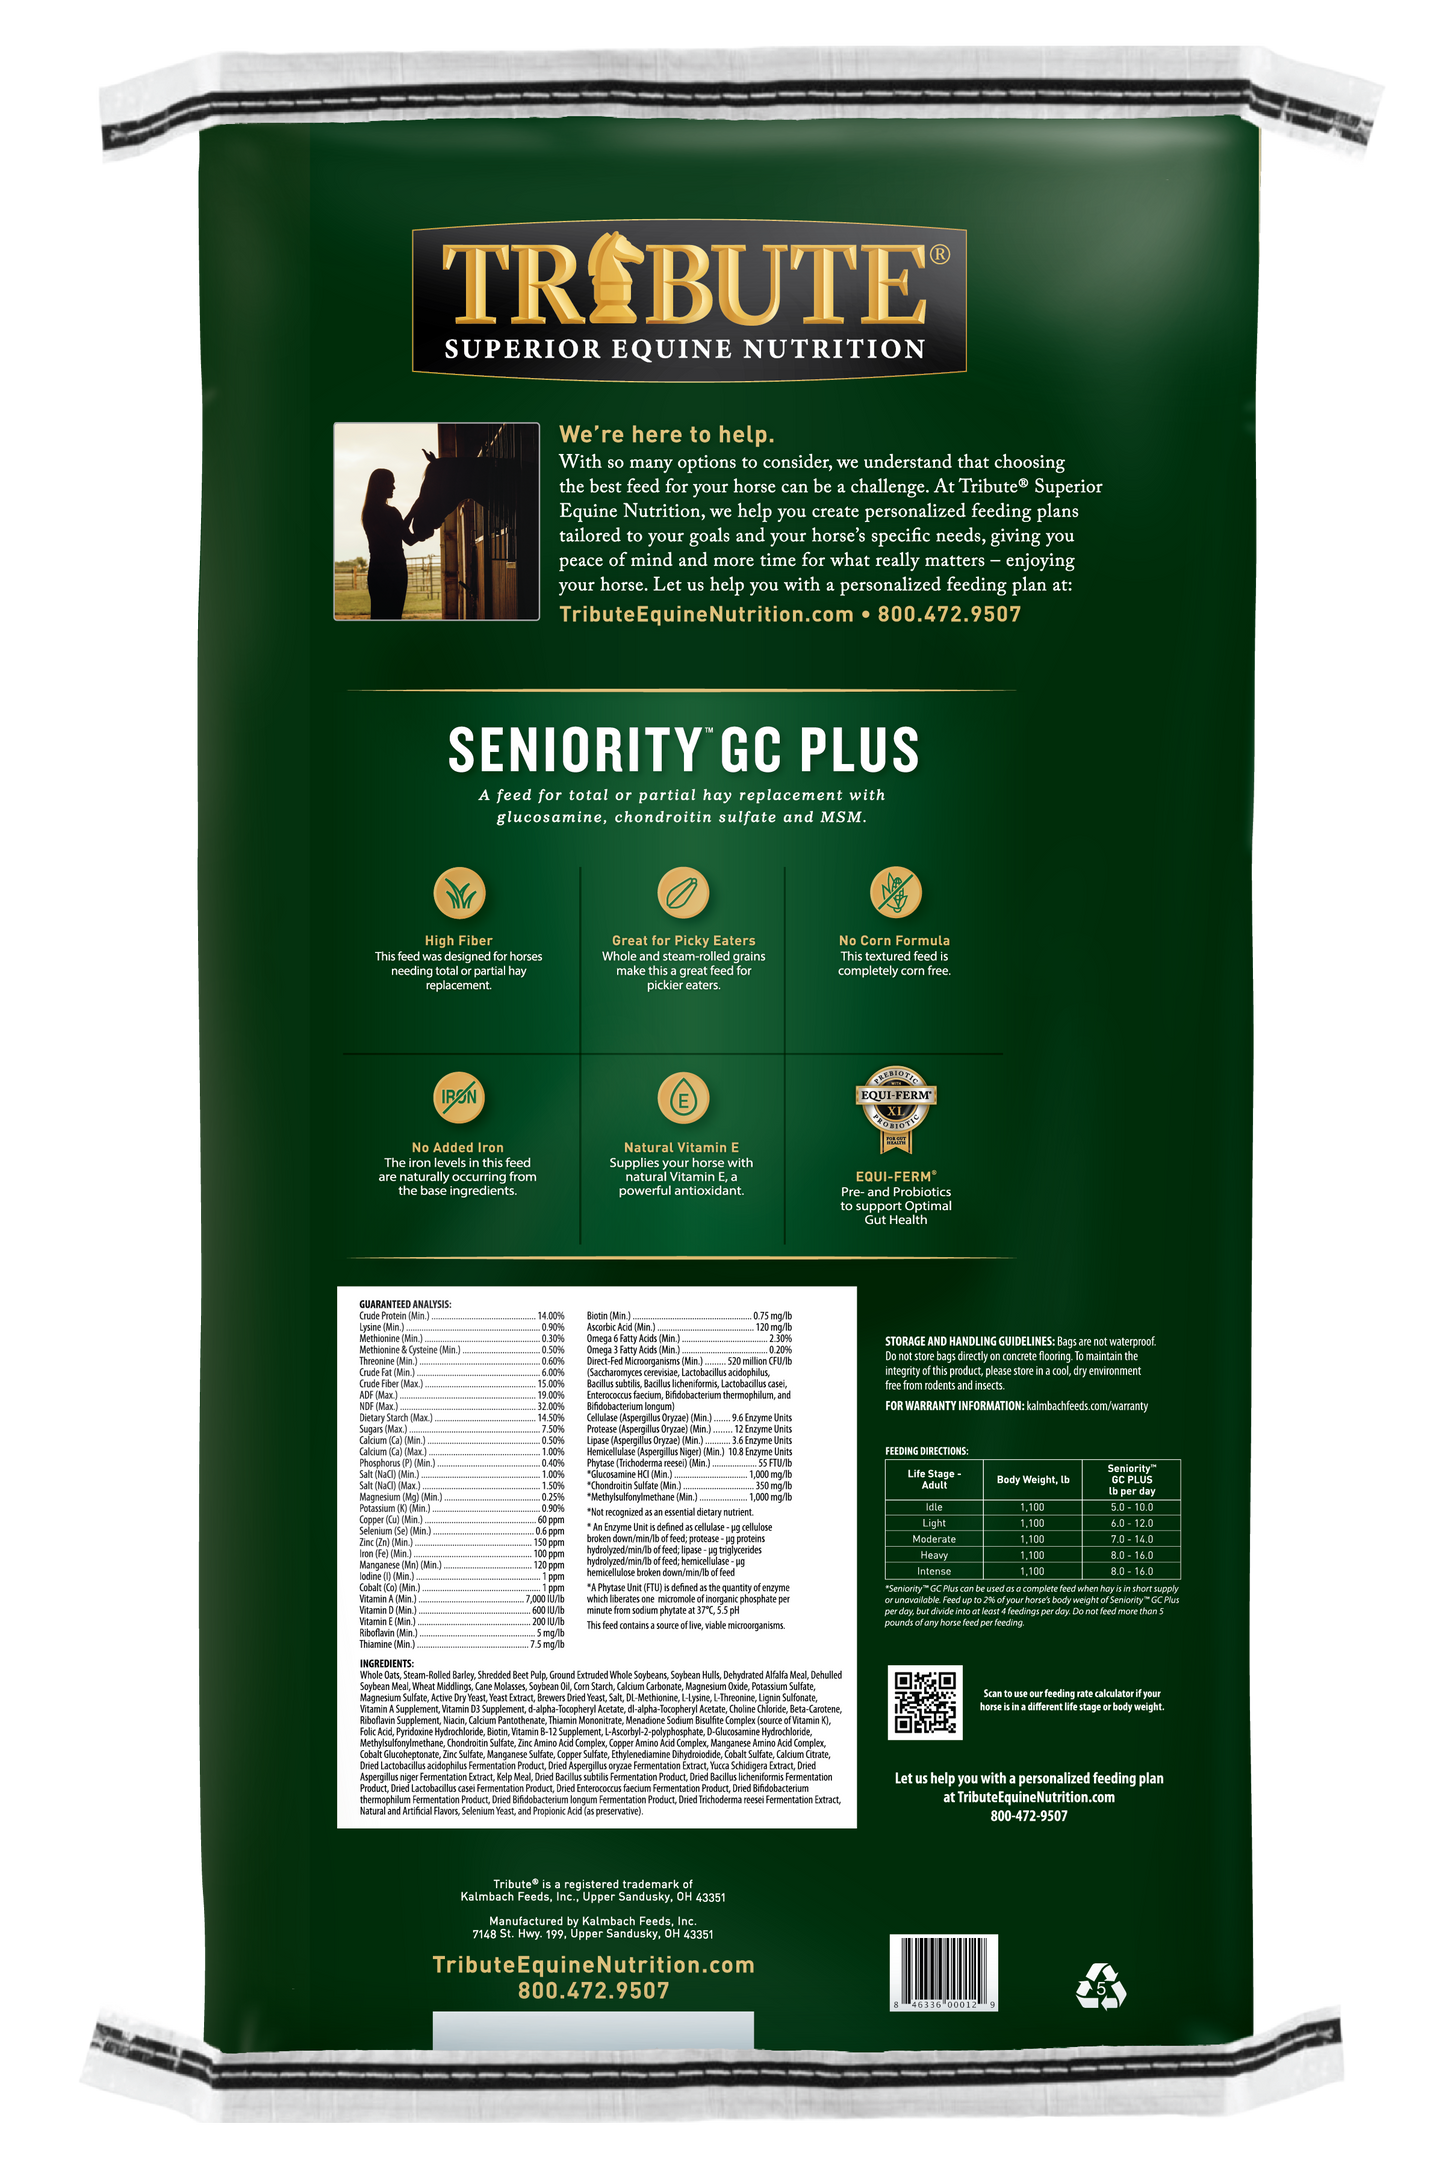 Seniority® GC Plus Horse Feed, Textured, Hay Replacement Feed with Joint Support